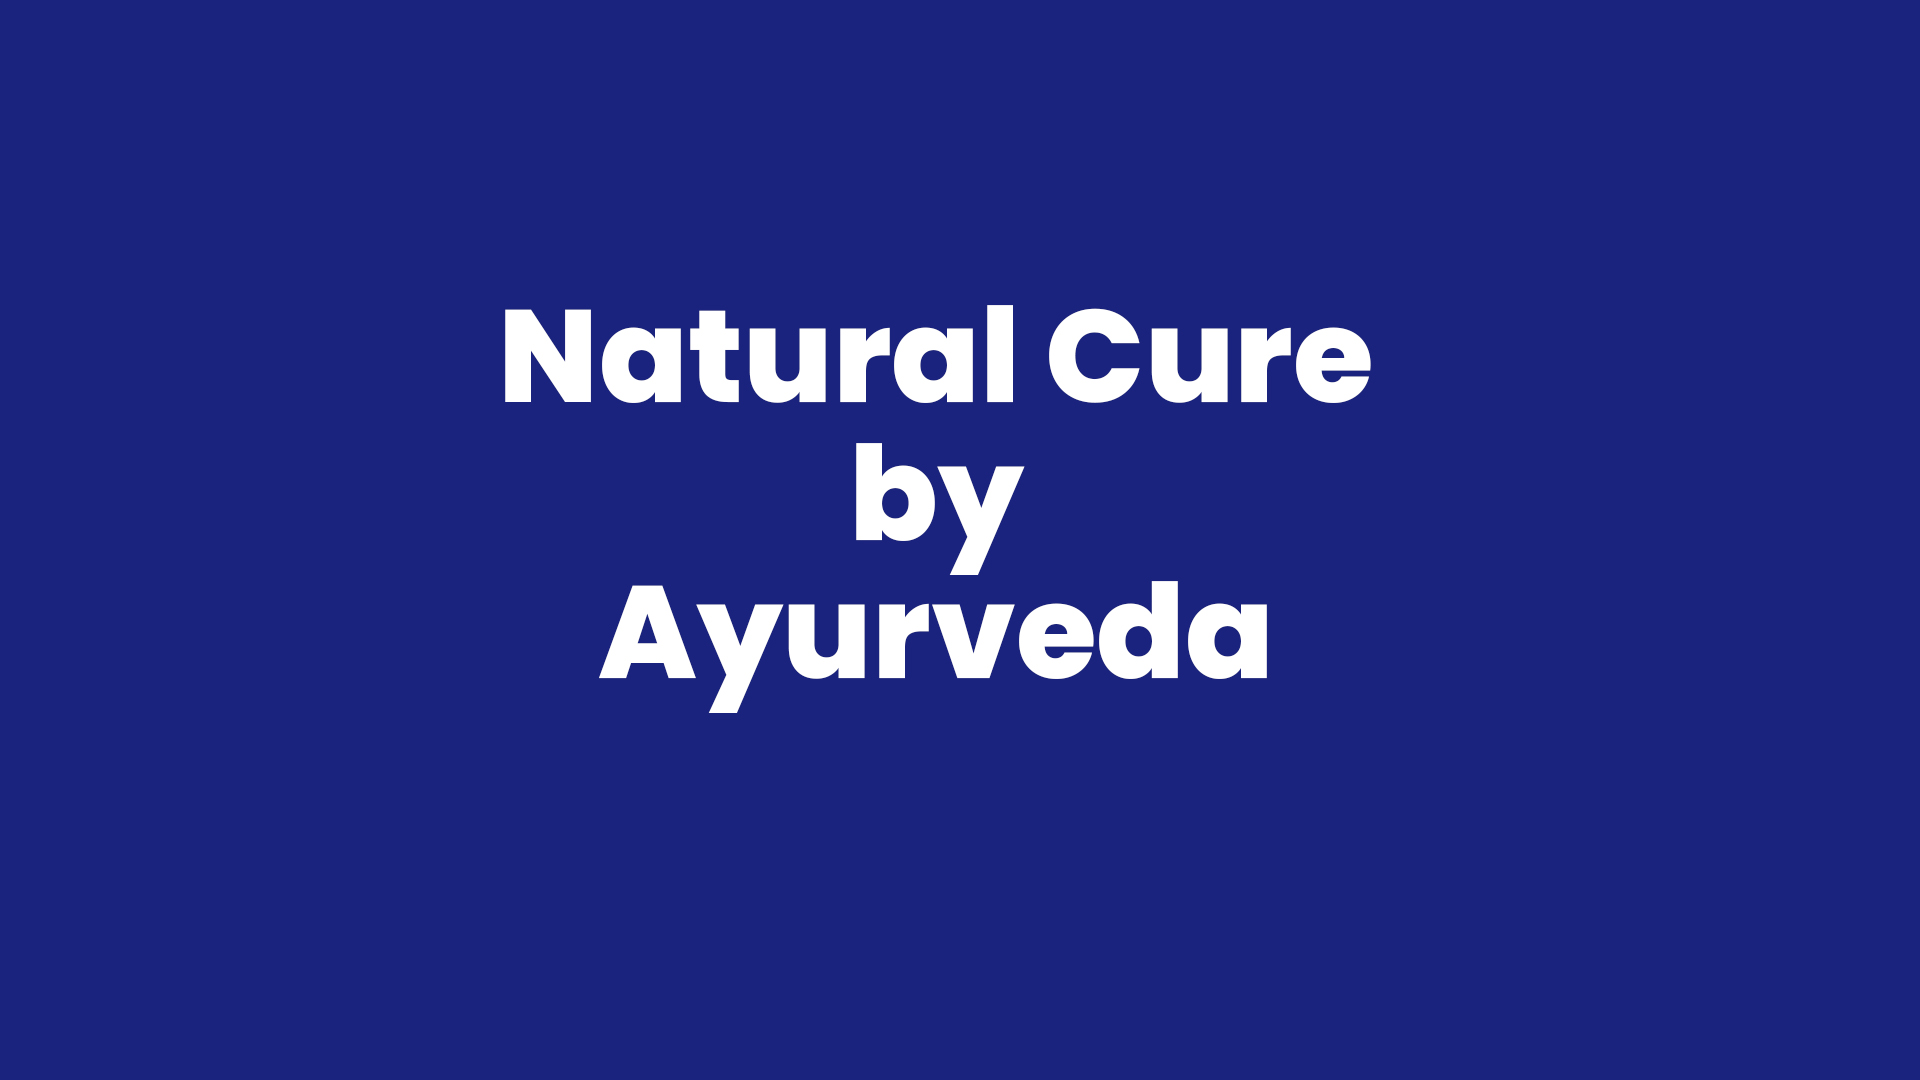 Natural Cure by Ayurveda